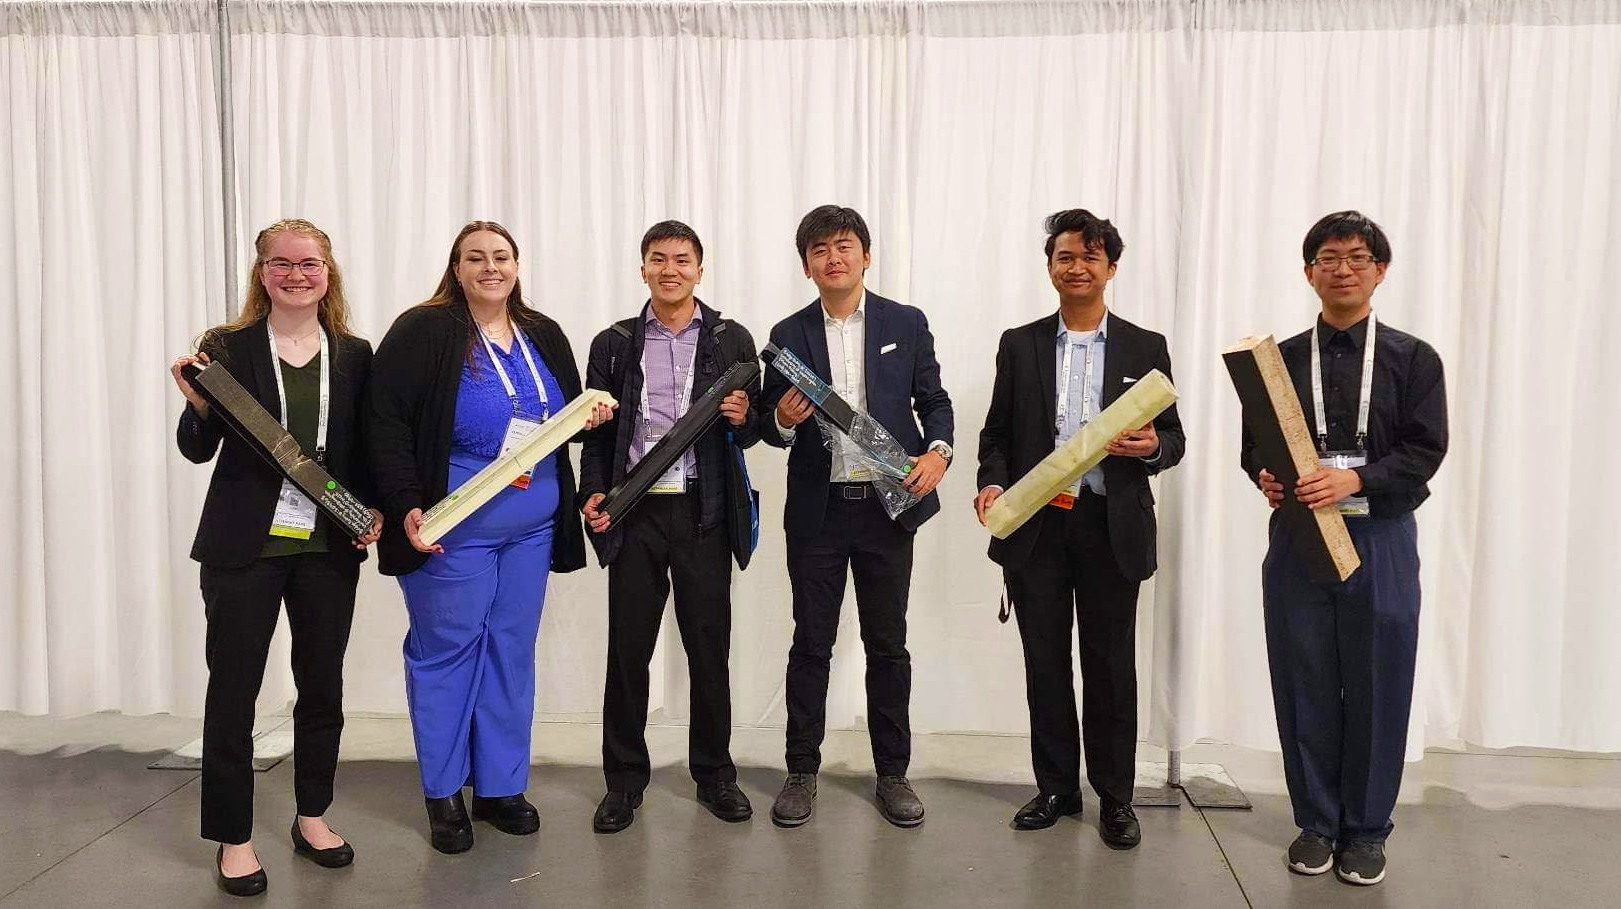 Six smiling students posing for picture holding their competition beams.